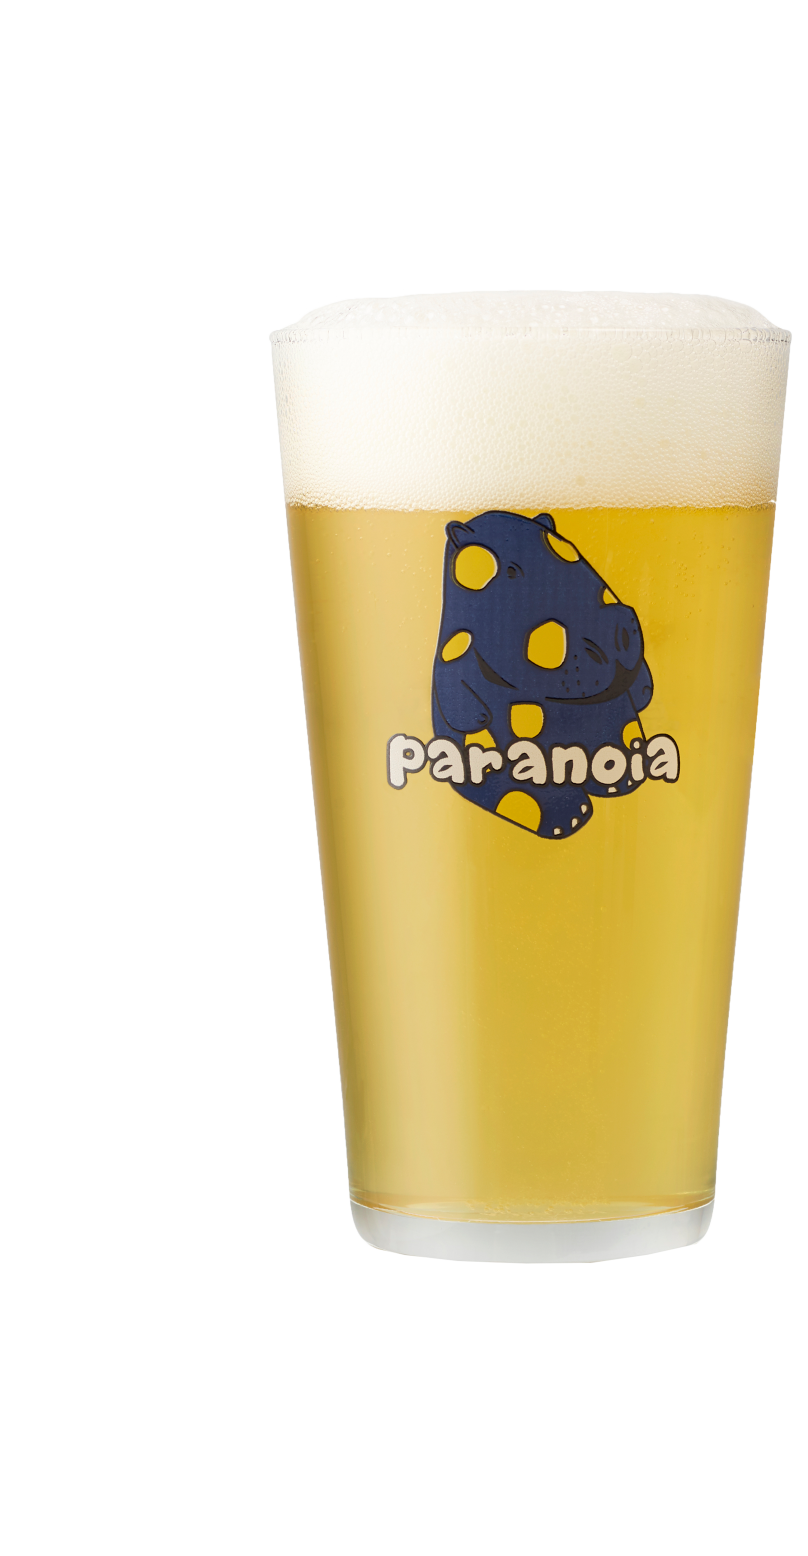 Paranoia Beer